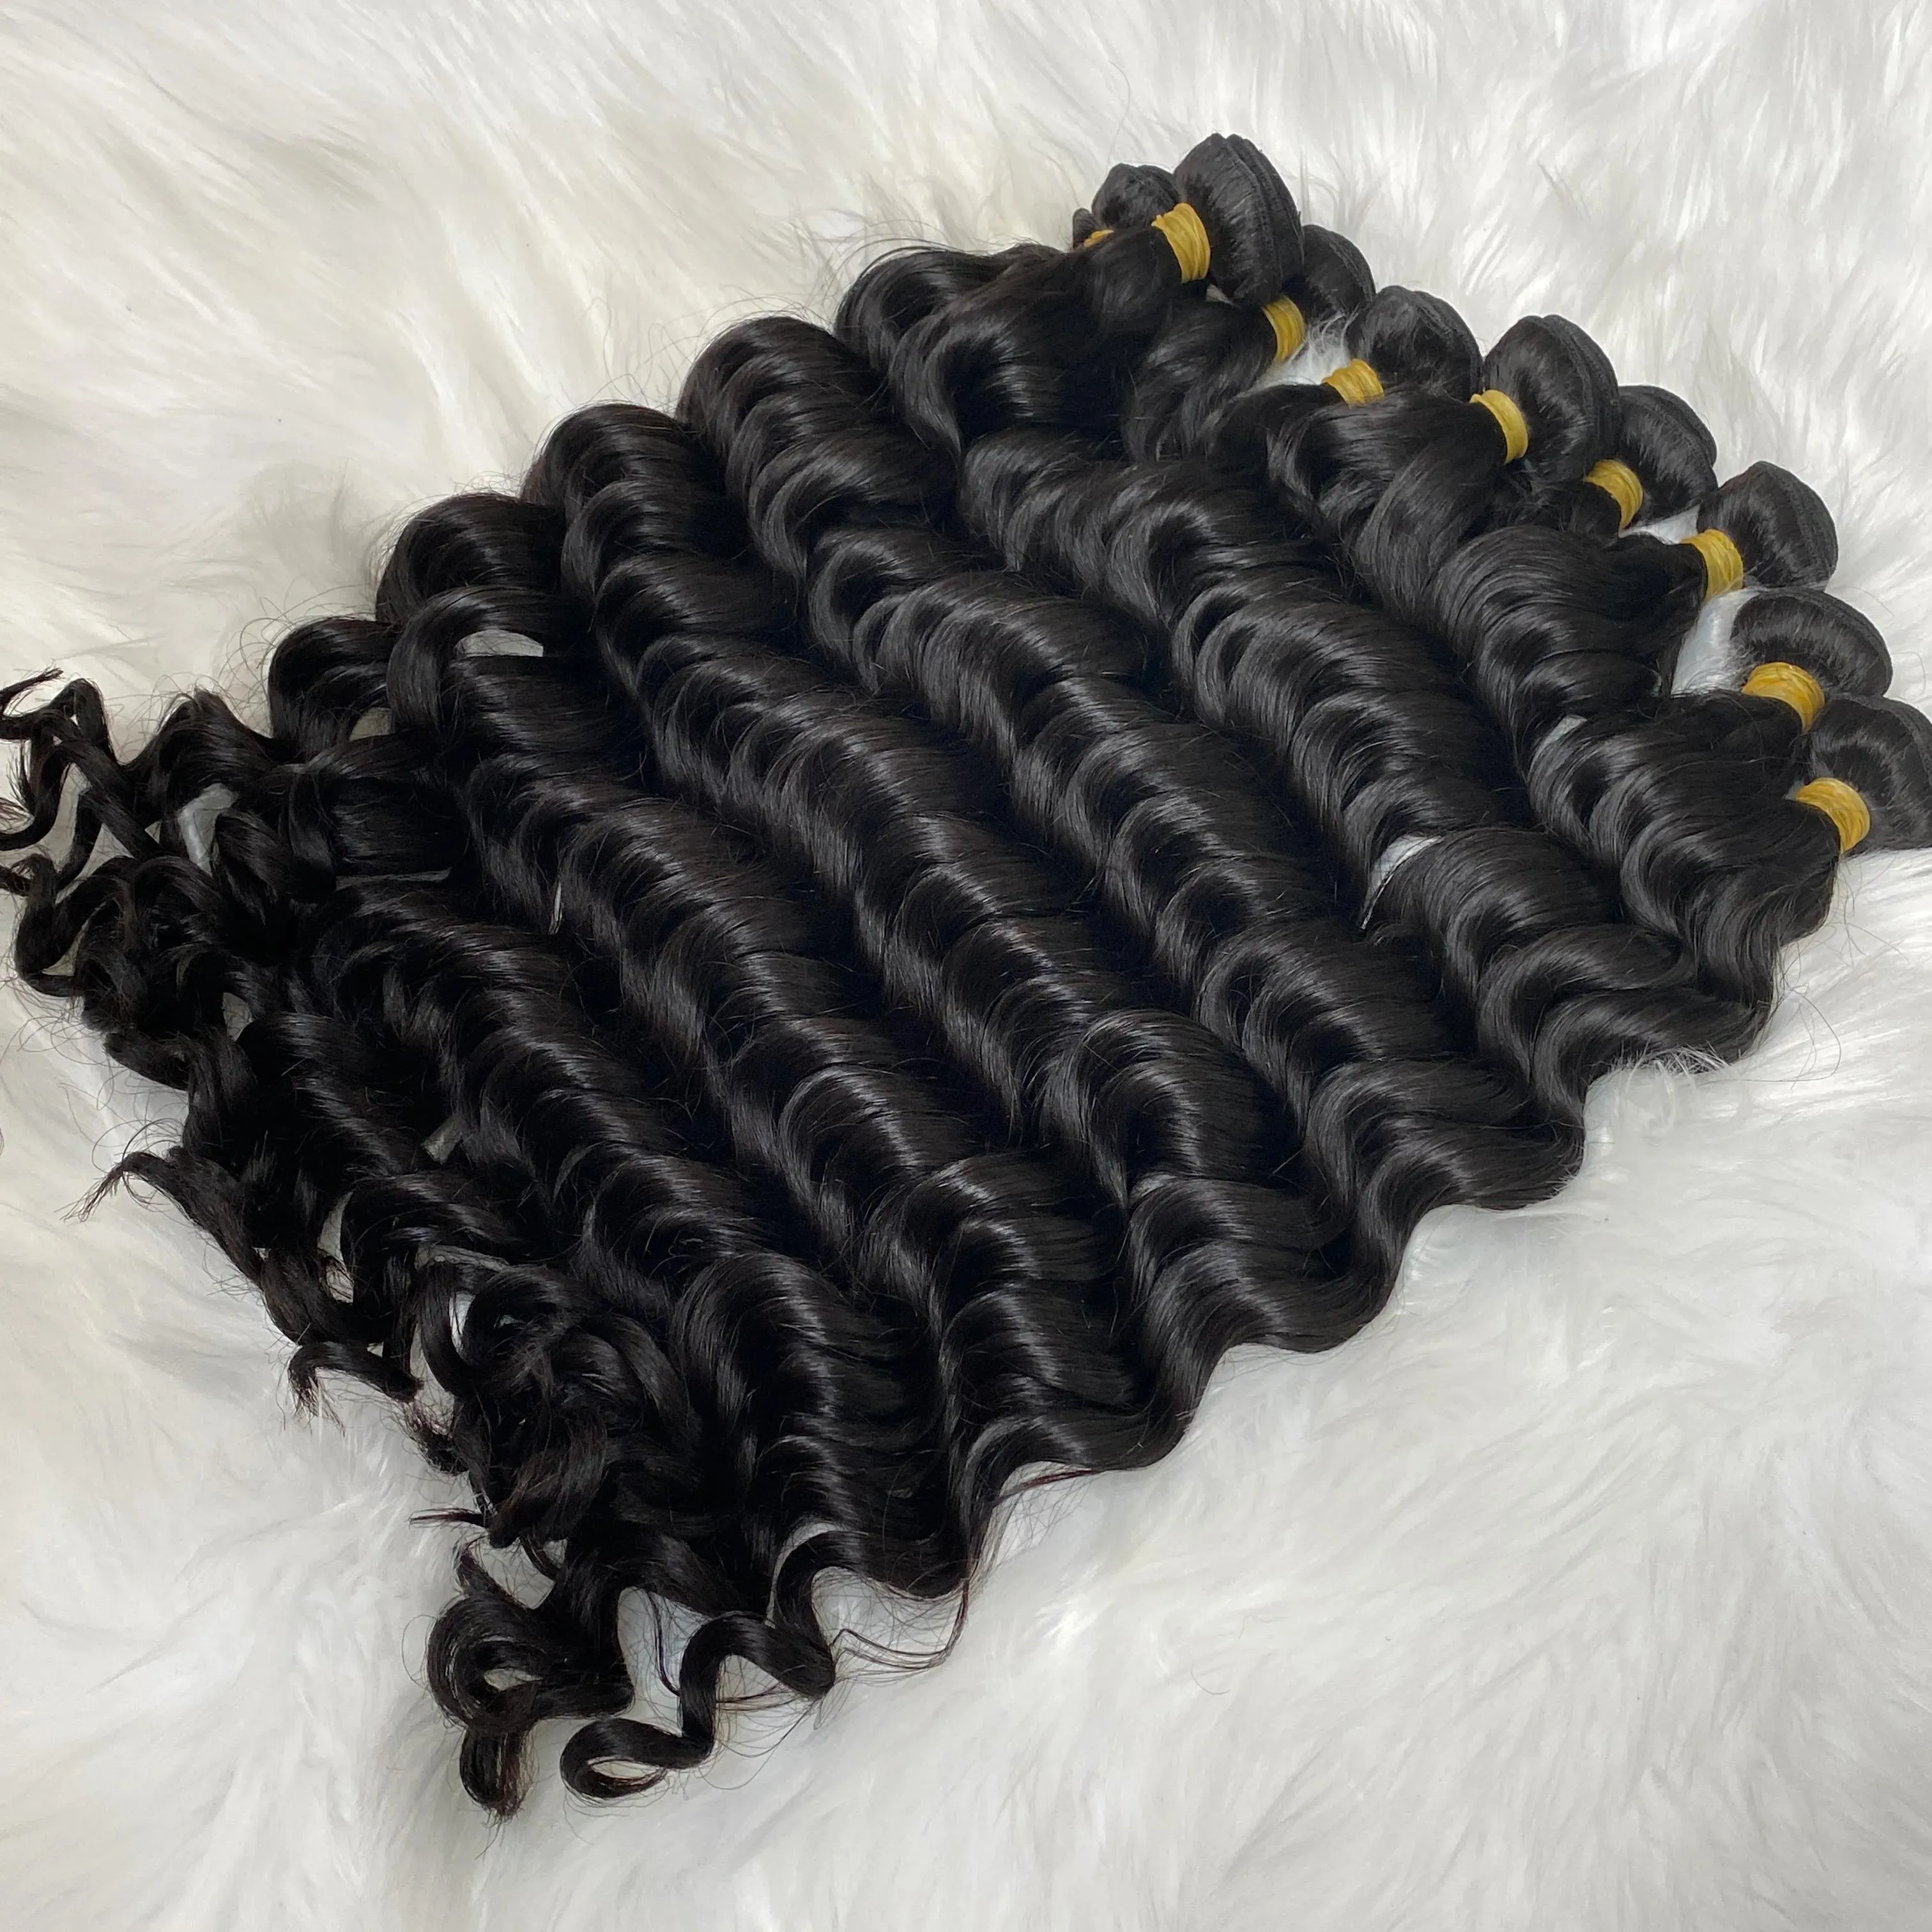 Wefts Glamorous Best Selling Double Wefted Malaysian Hair Extensions 100% Human Hair Weft Peruansk Indian Brazilian Hair Weaves 4 Buntle